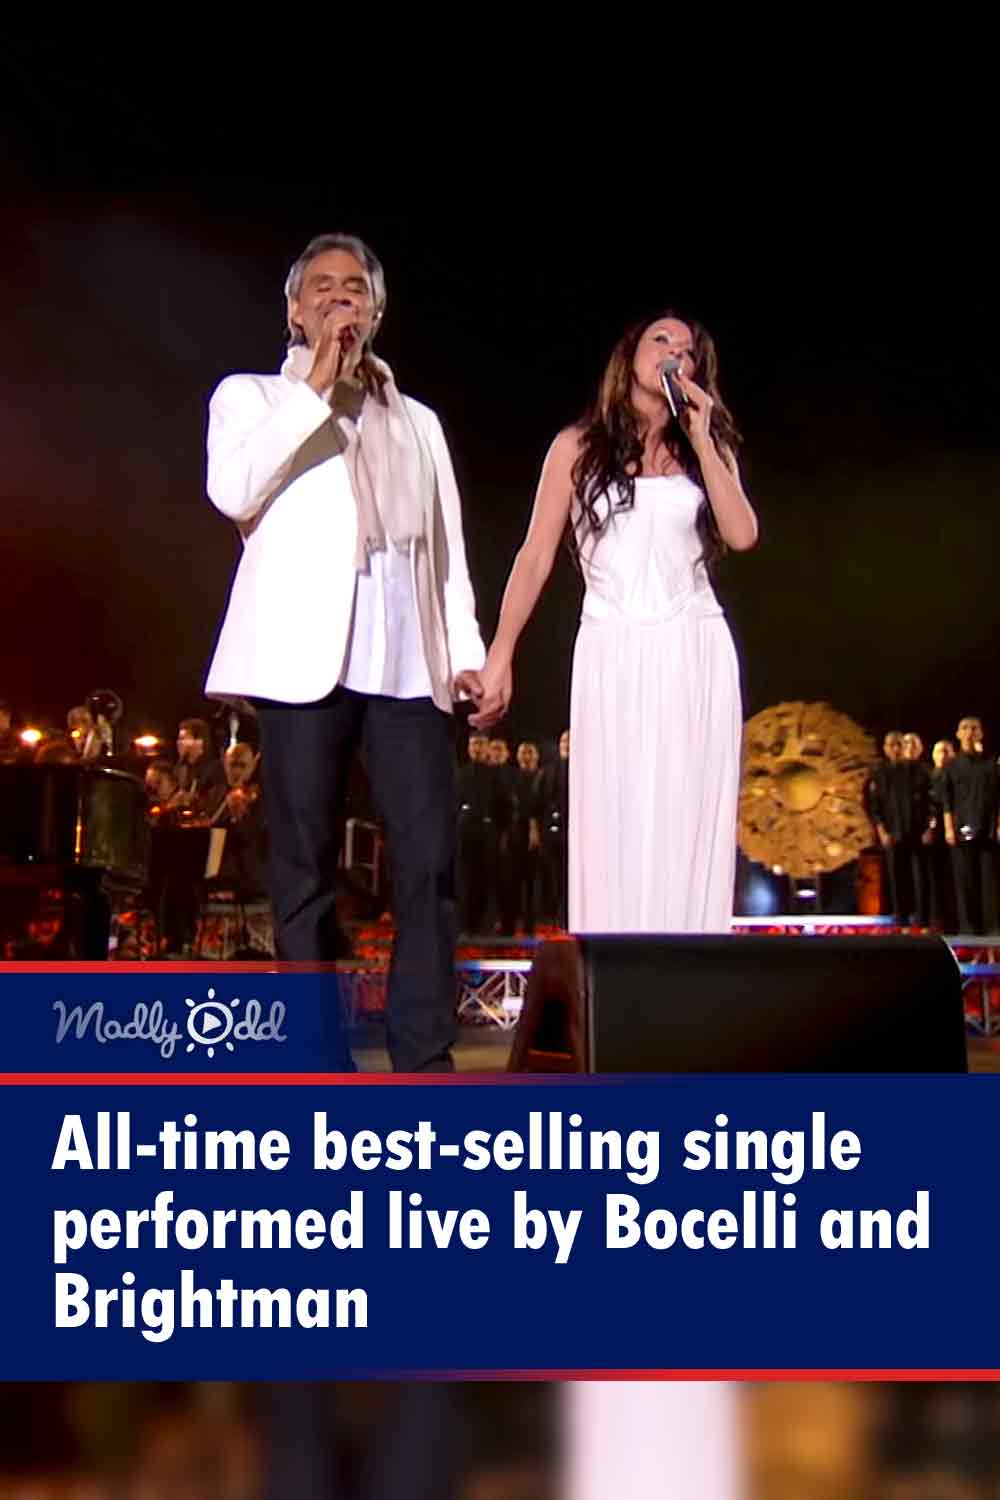 All-time best-selling single performed live by Bocelli and Brightman